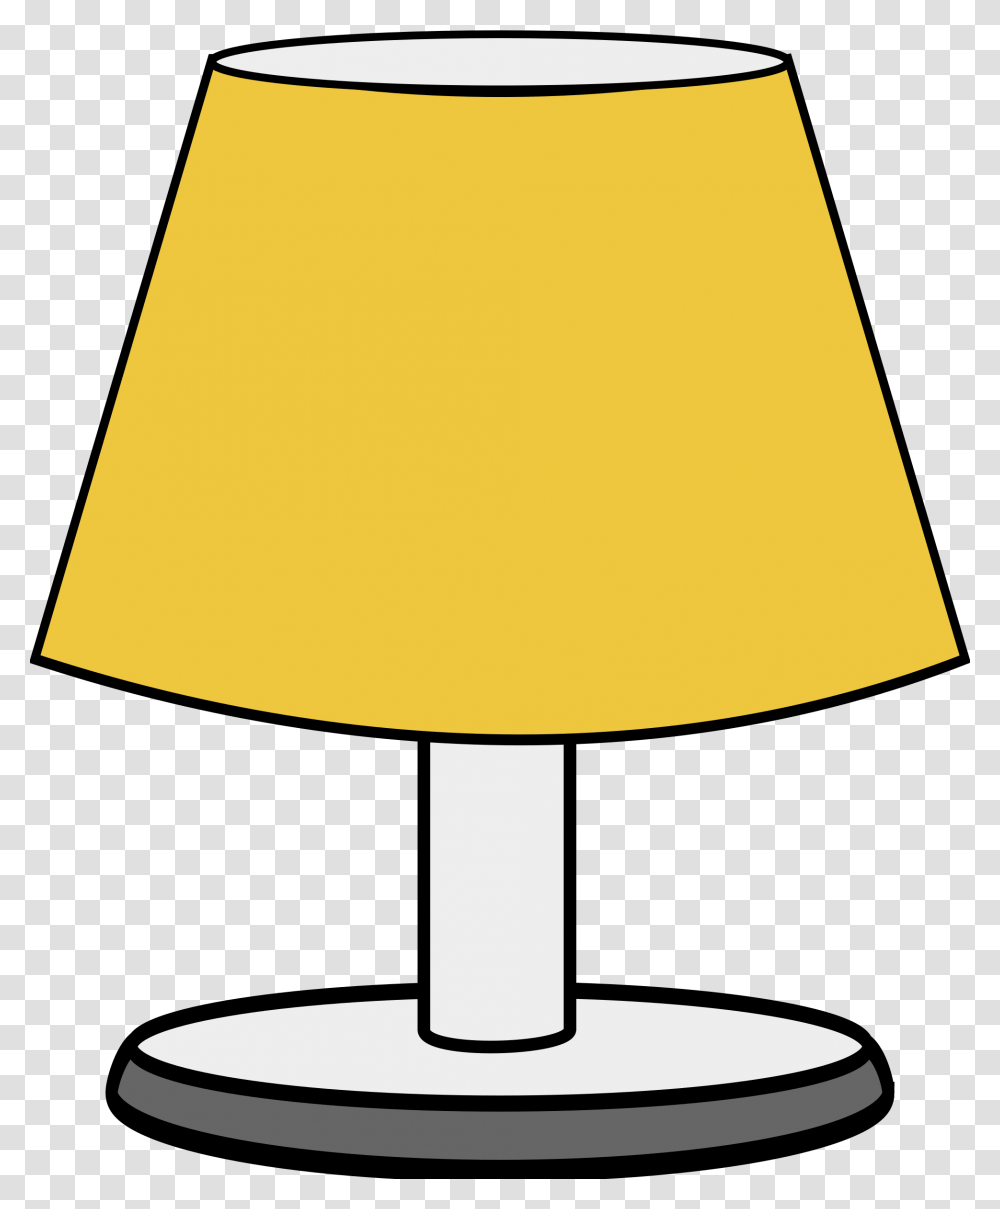 Clipart Images Of Lamp Lamp Clipart, Lampshade, Table Lamp Transparent Png